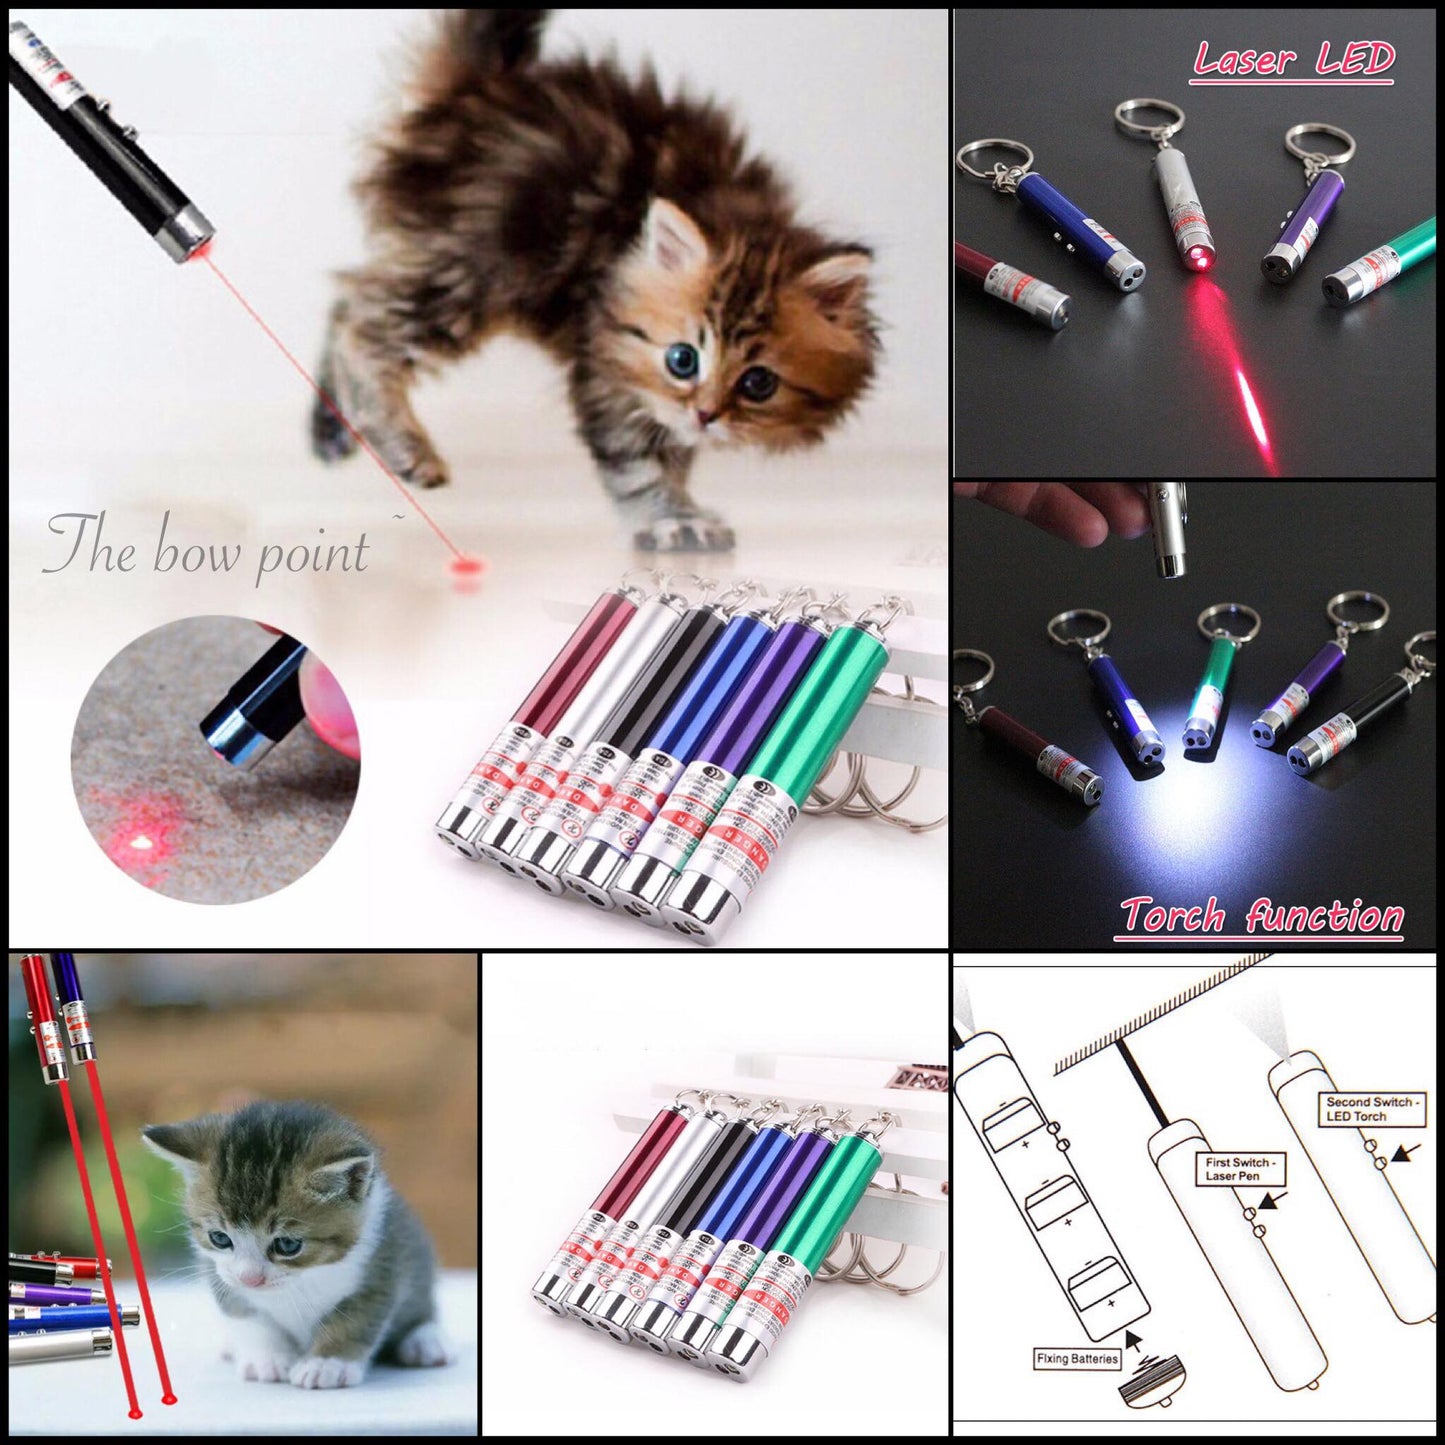 Pet Laser Light and Torch.